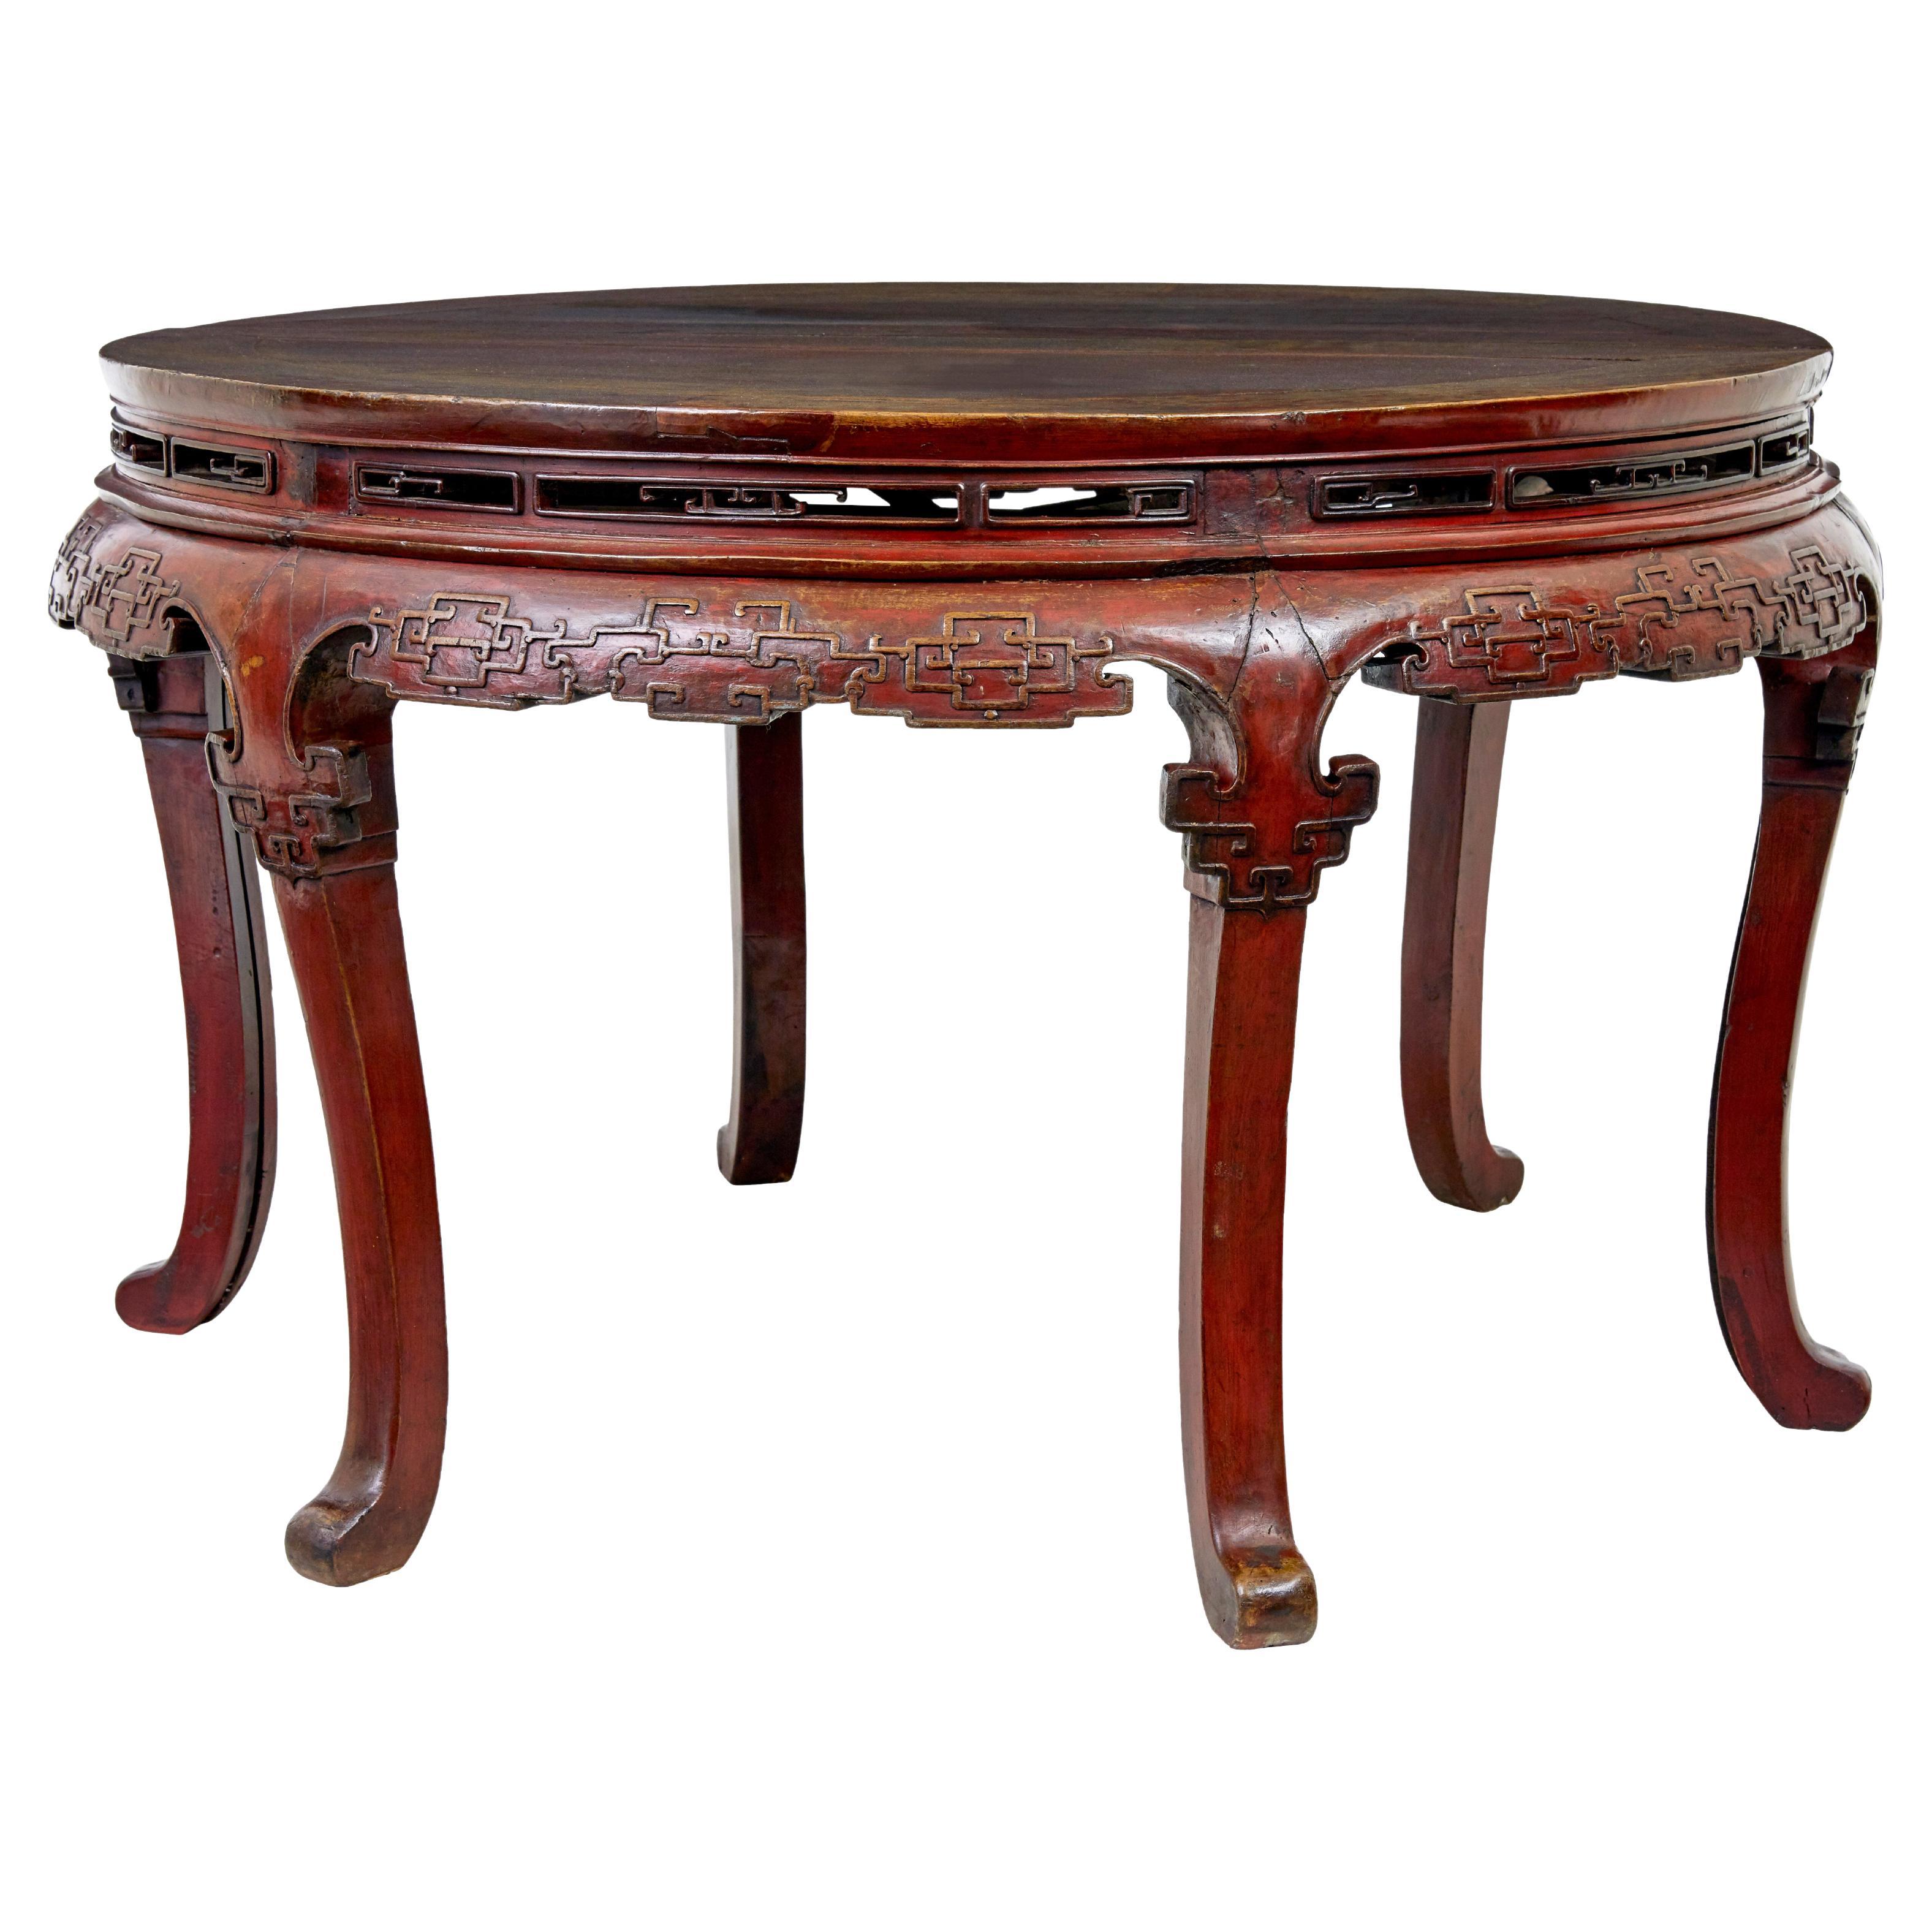 Pair of 19th century red lacquer Chinese demi lune tables